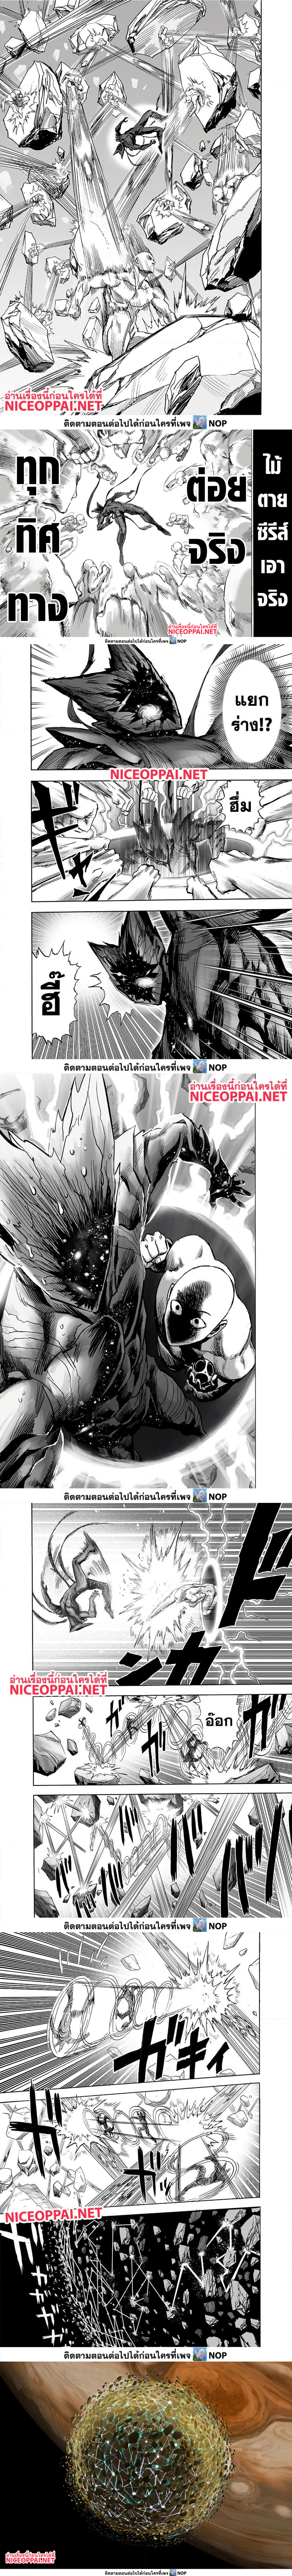 One Punch Man 167 (7)